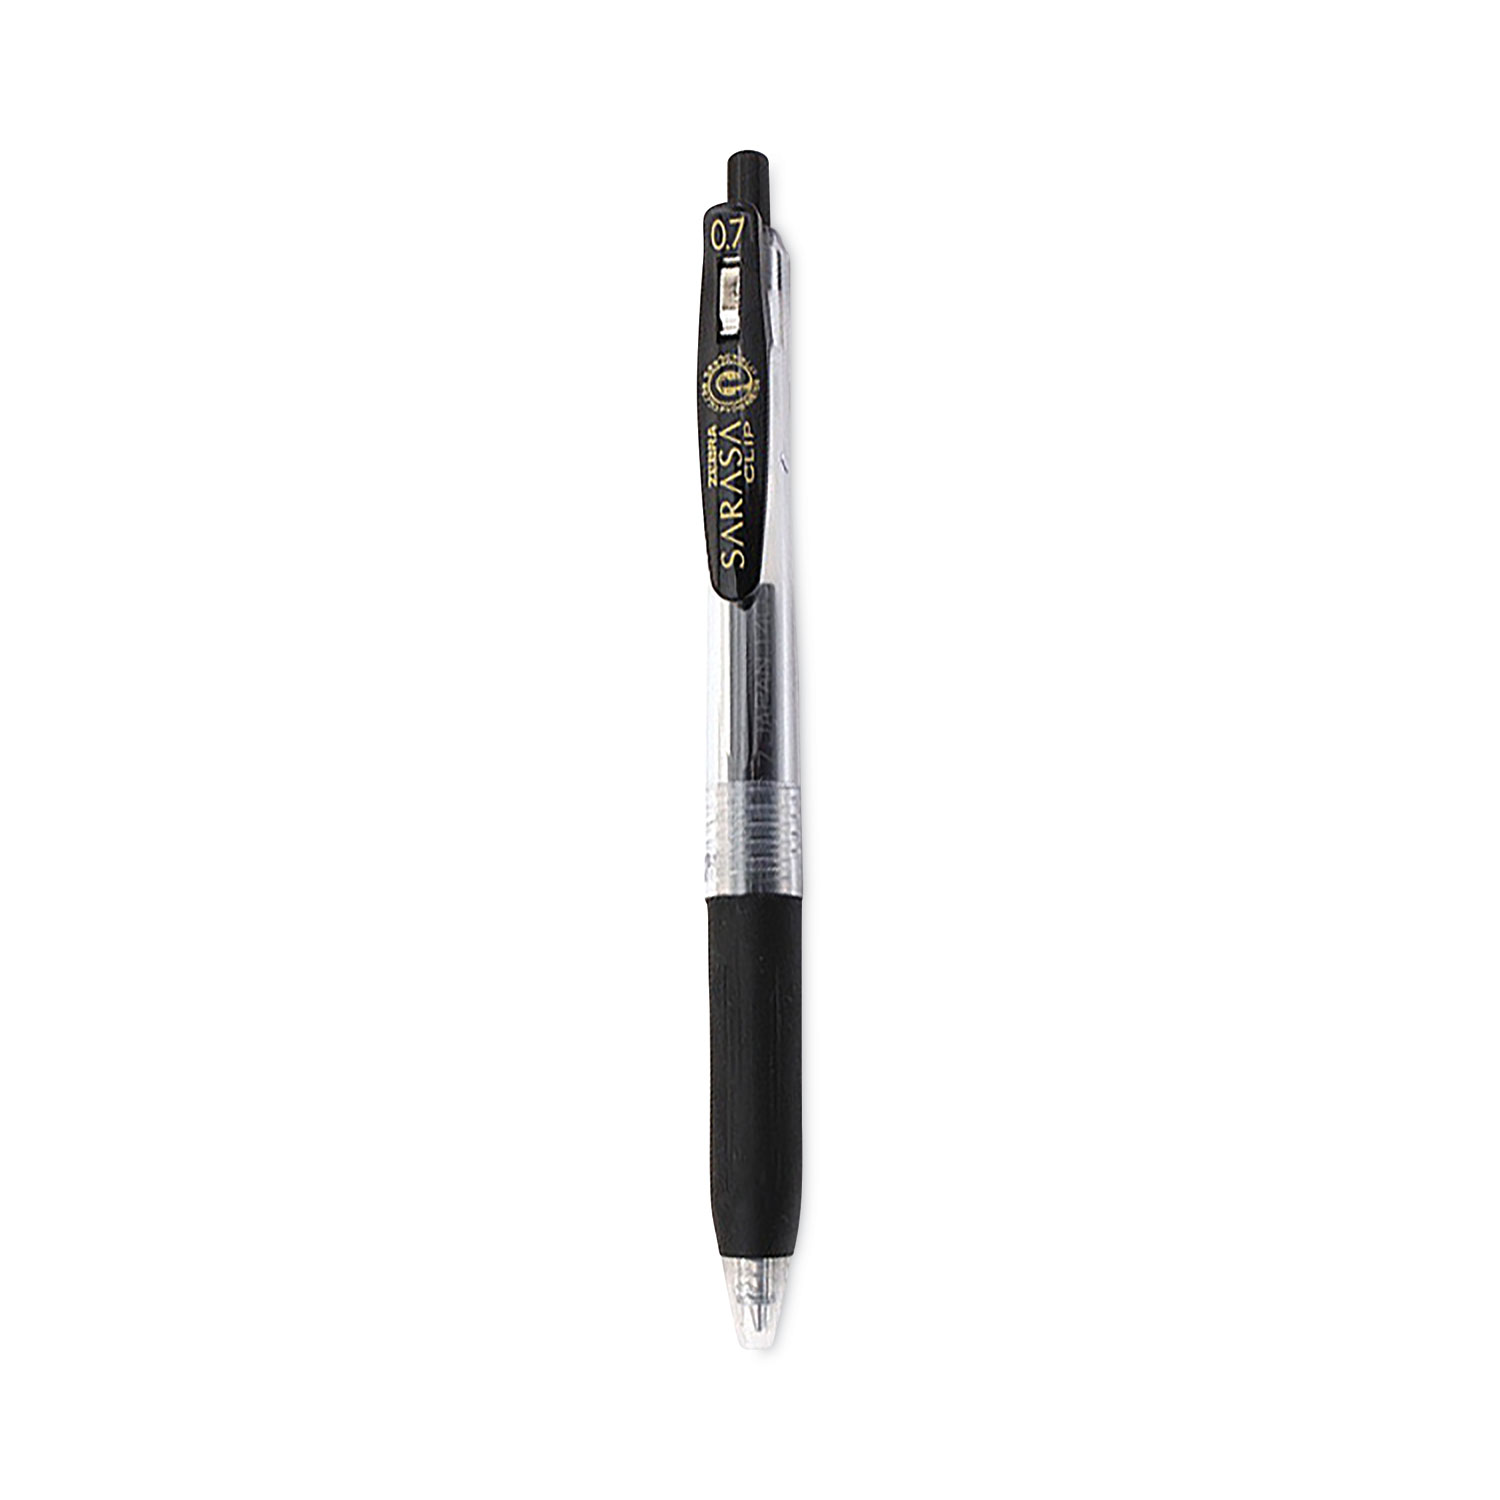 Engrave Pen - All Surface Writing Battery Operated With 2